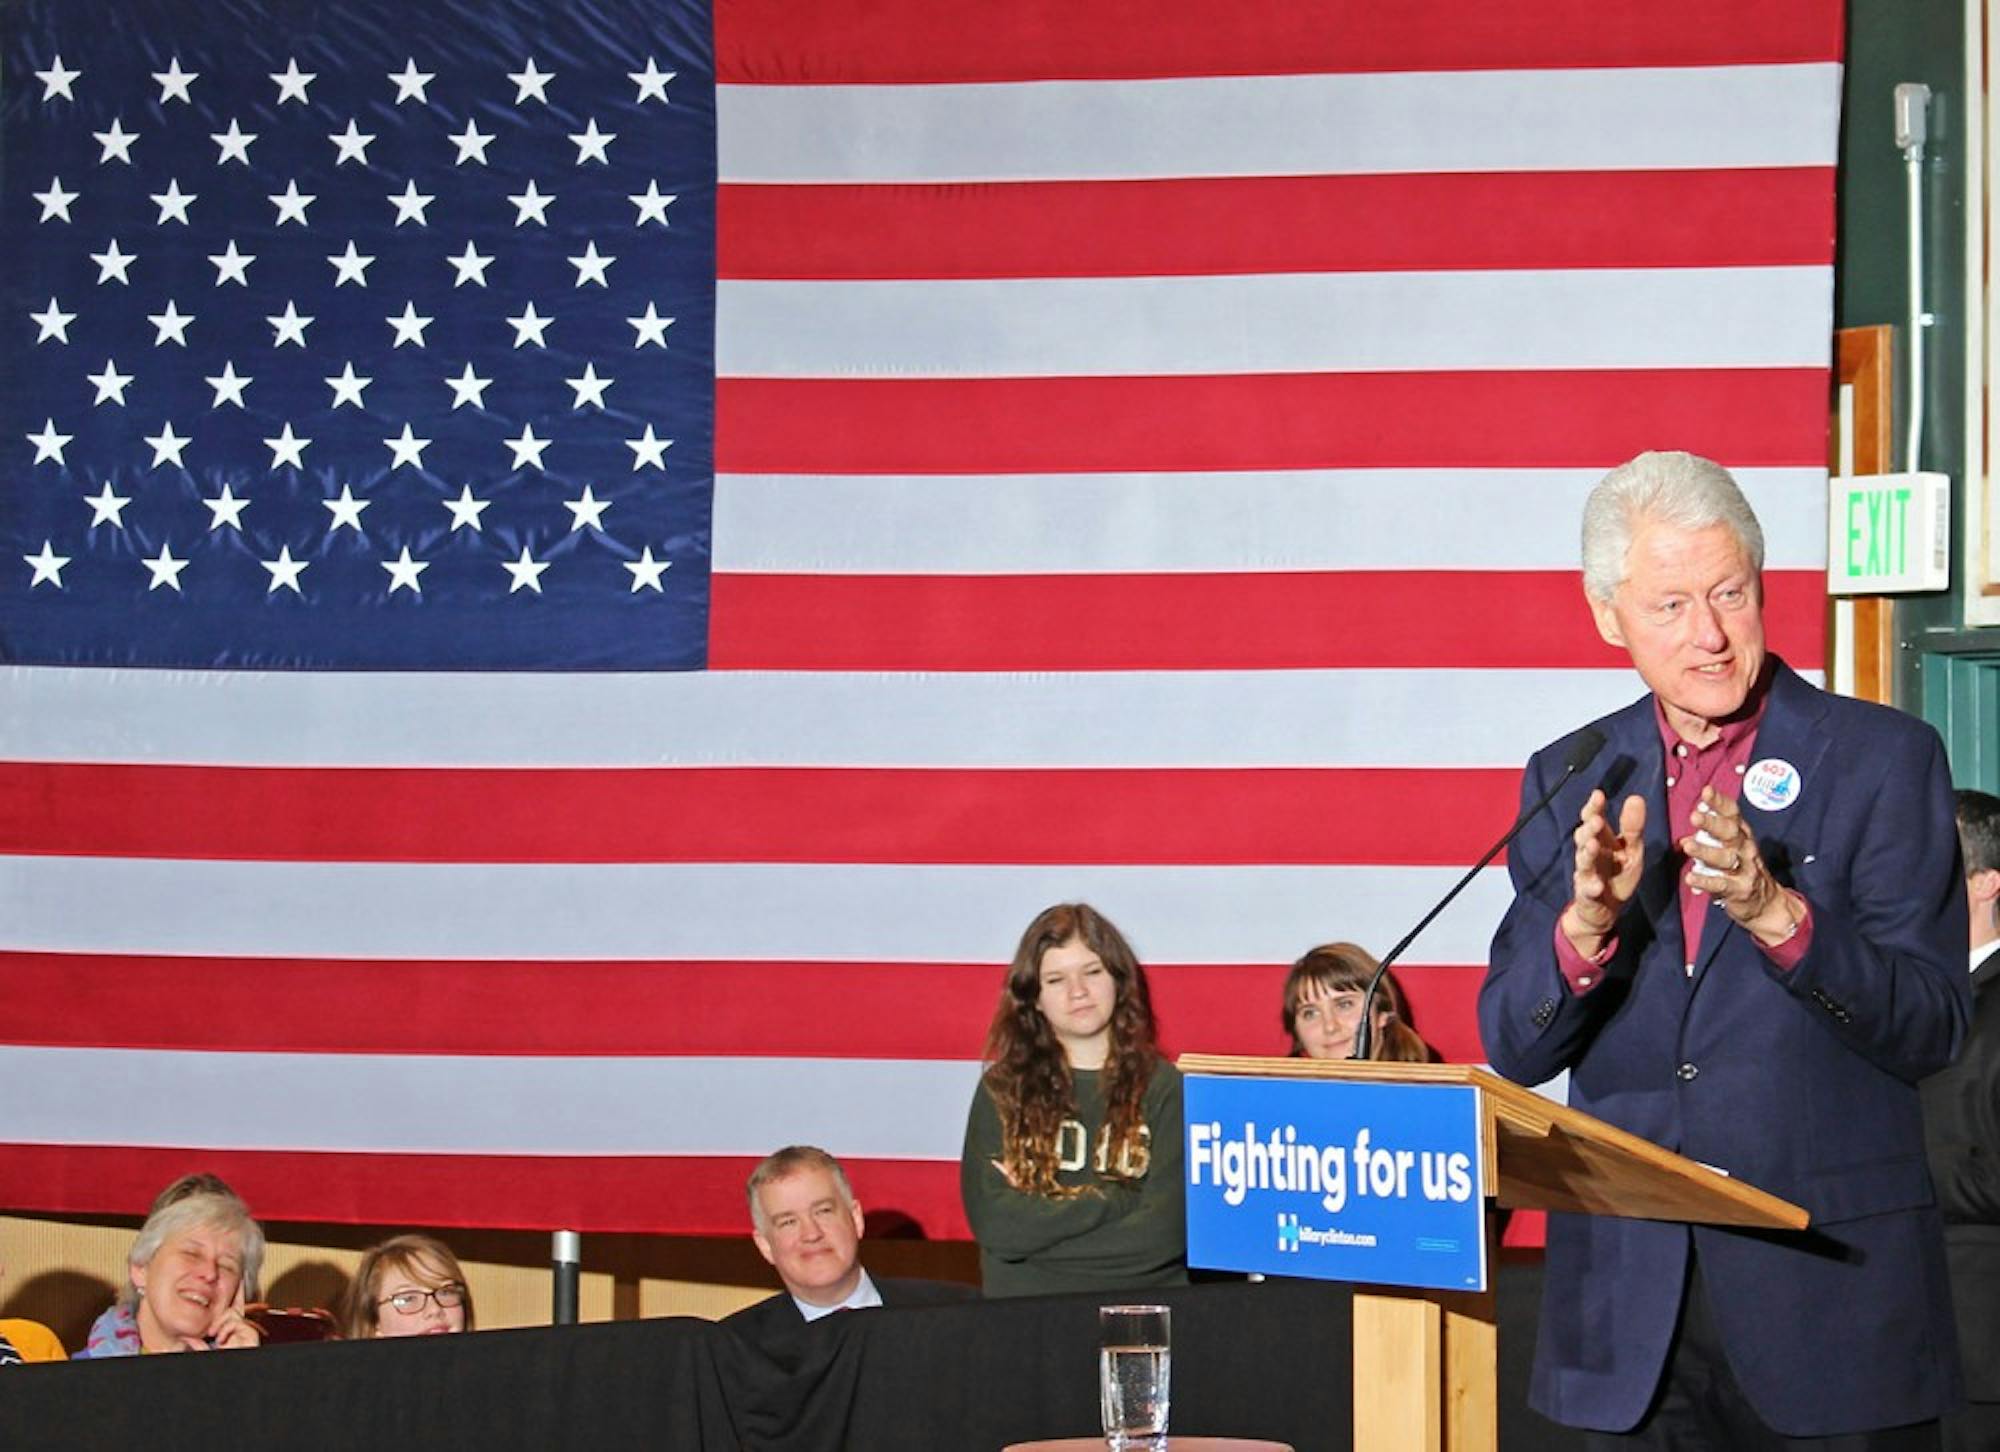 Bill Clinton speaks to the College at a campaign event for Hillary Clinton.